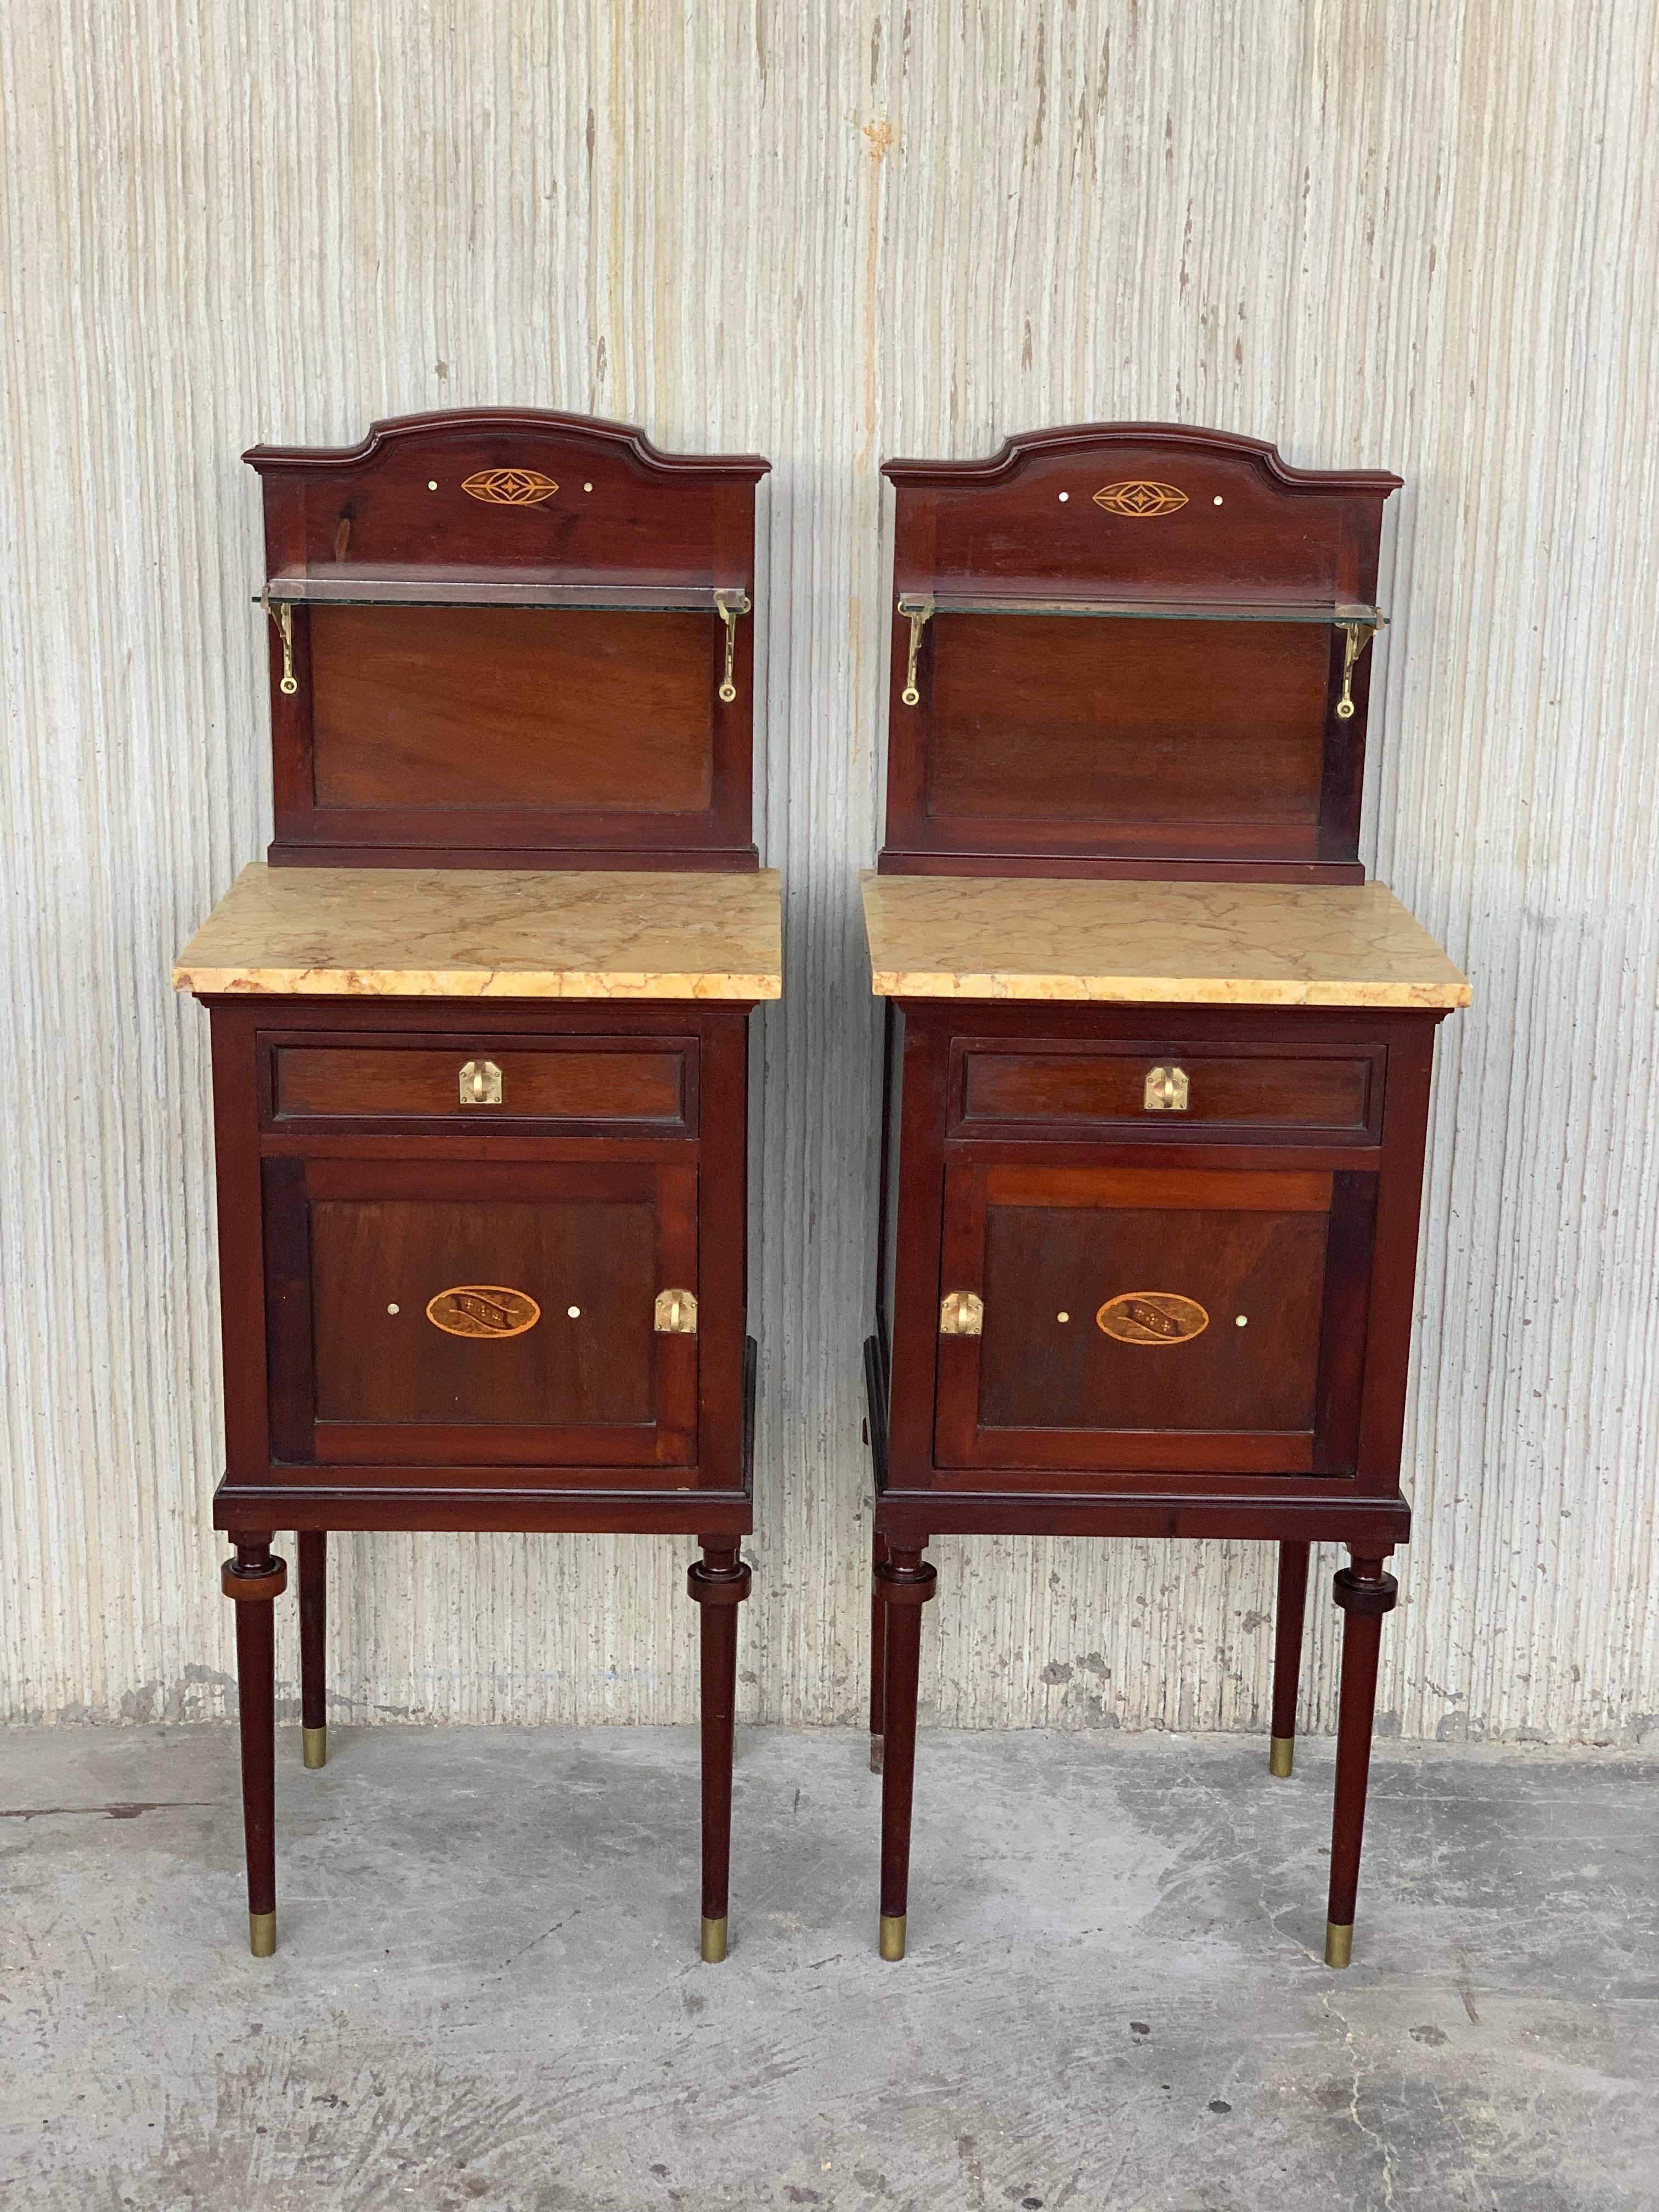 Modern Art Nouveau Pair of Walnut Nightstands with Crest, Marble Top and Glass Shelve For Sale